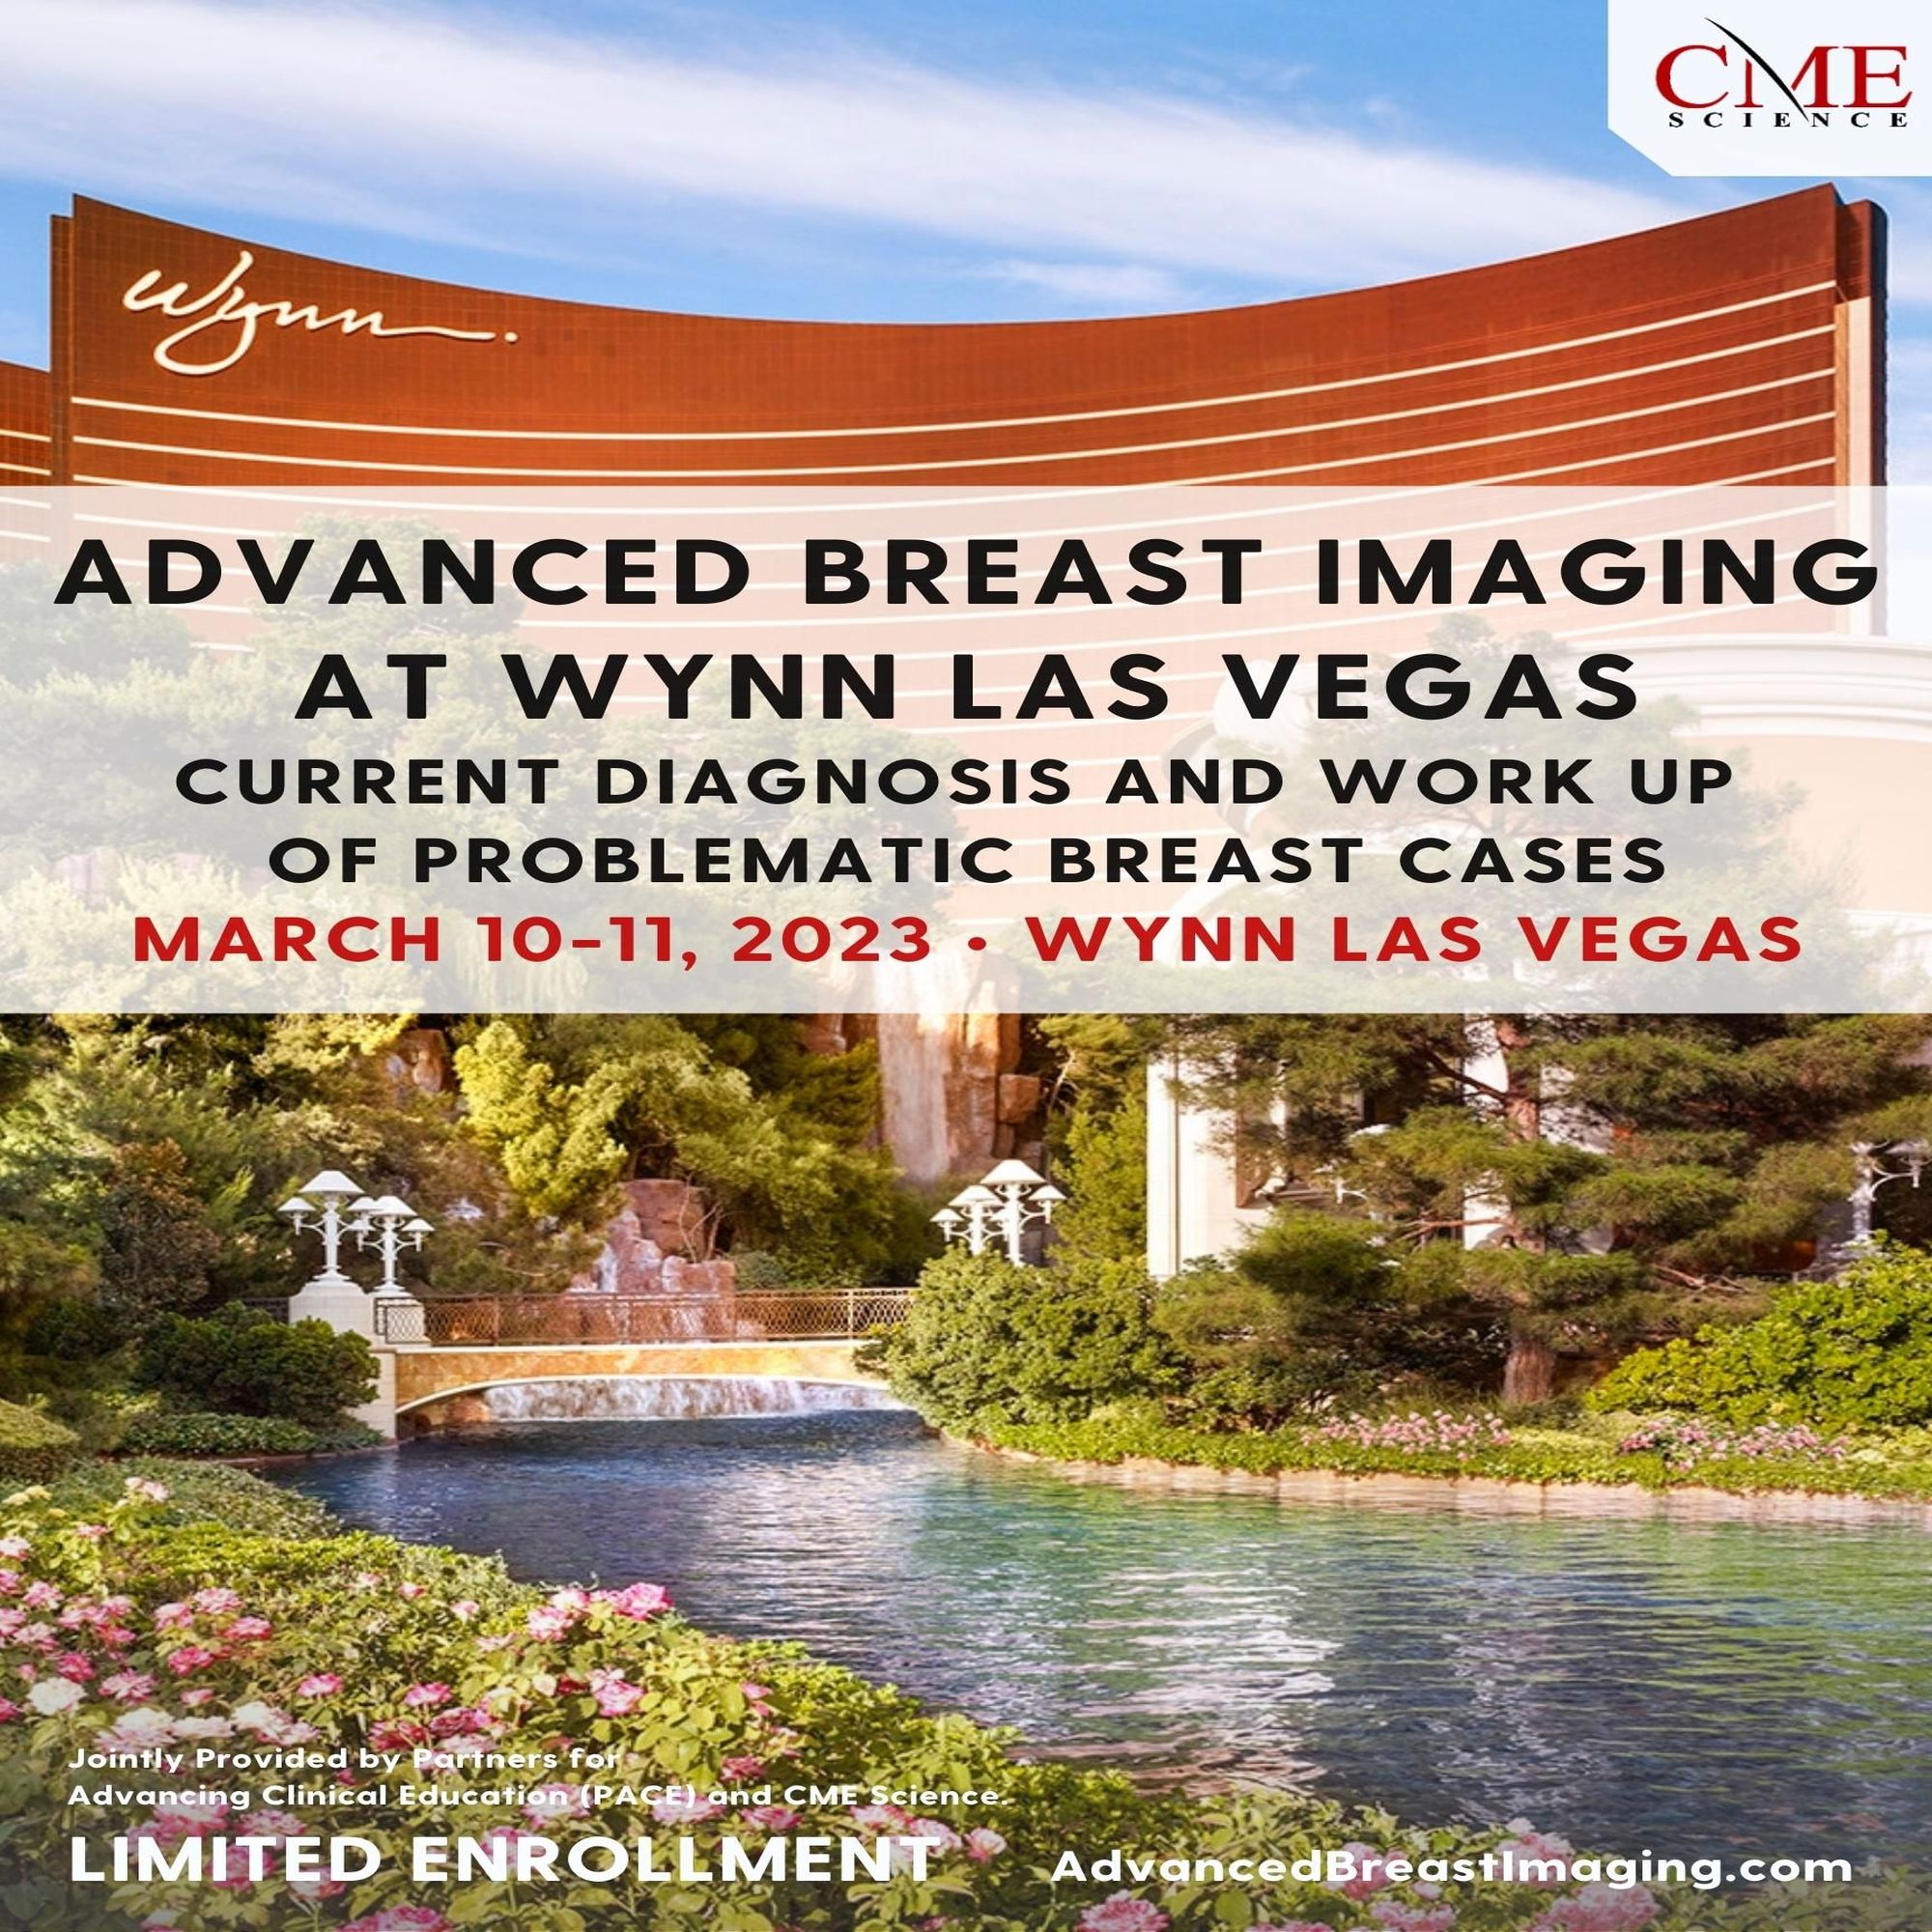 Advanced Breast Imaging: Current Diagnosis And Work Up, Las Vegas, Nevada, United States